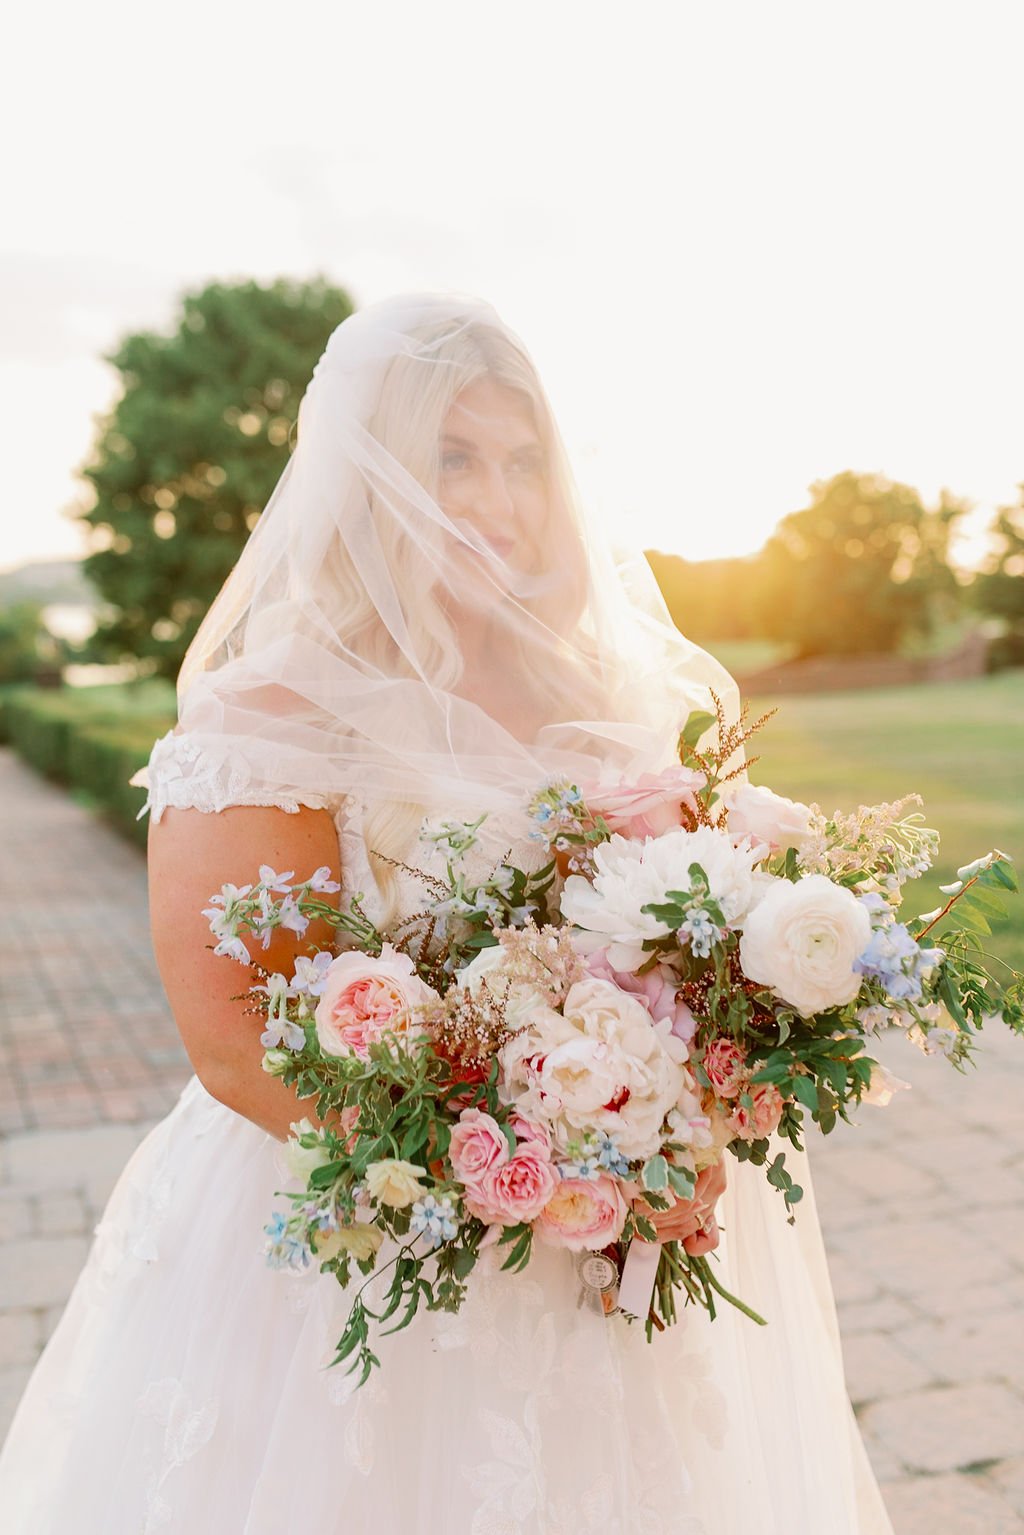 A lush bridal bouquet filled with hues of blush, pink, ivory, and hints of French blue. Garden roses, majolica spray roses, champagne roses, peonies, ranunculus, delphinium, and spirea make up this fairytale bouquet. Designed by Rosemary & Finch in N